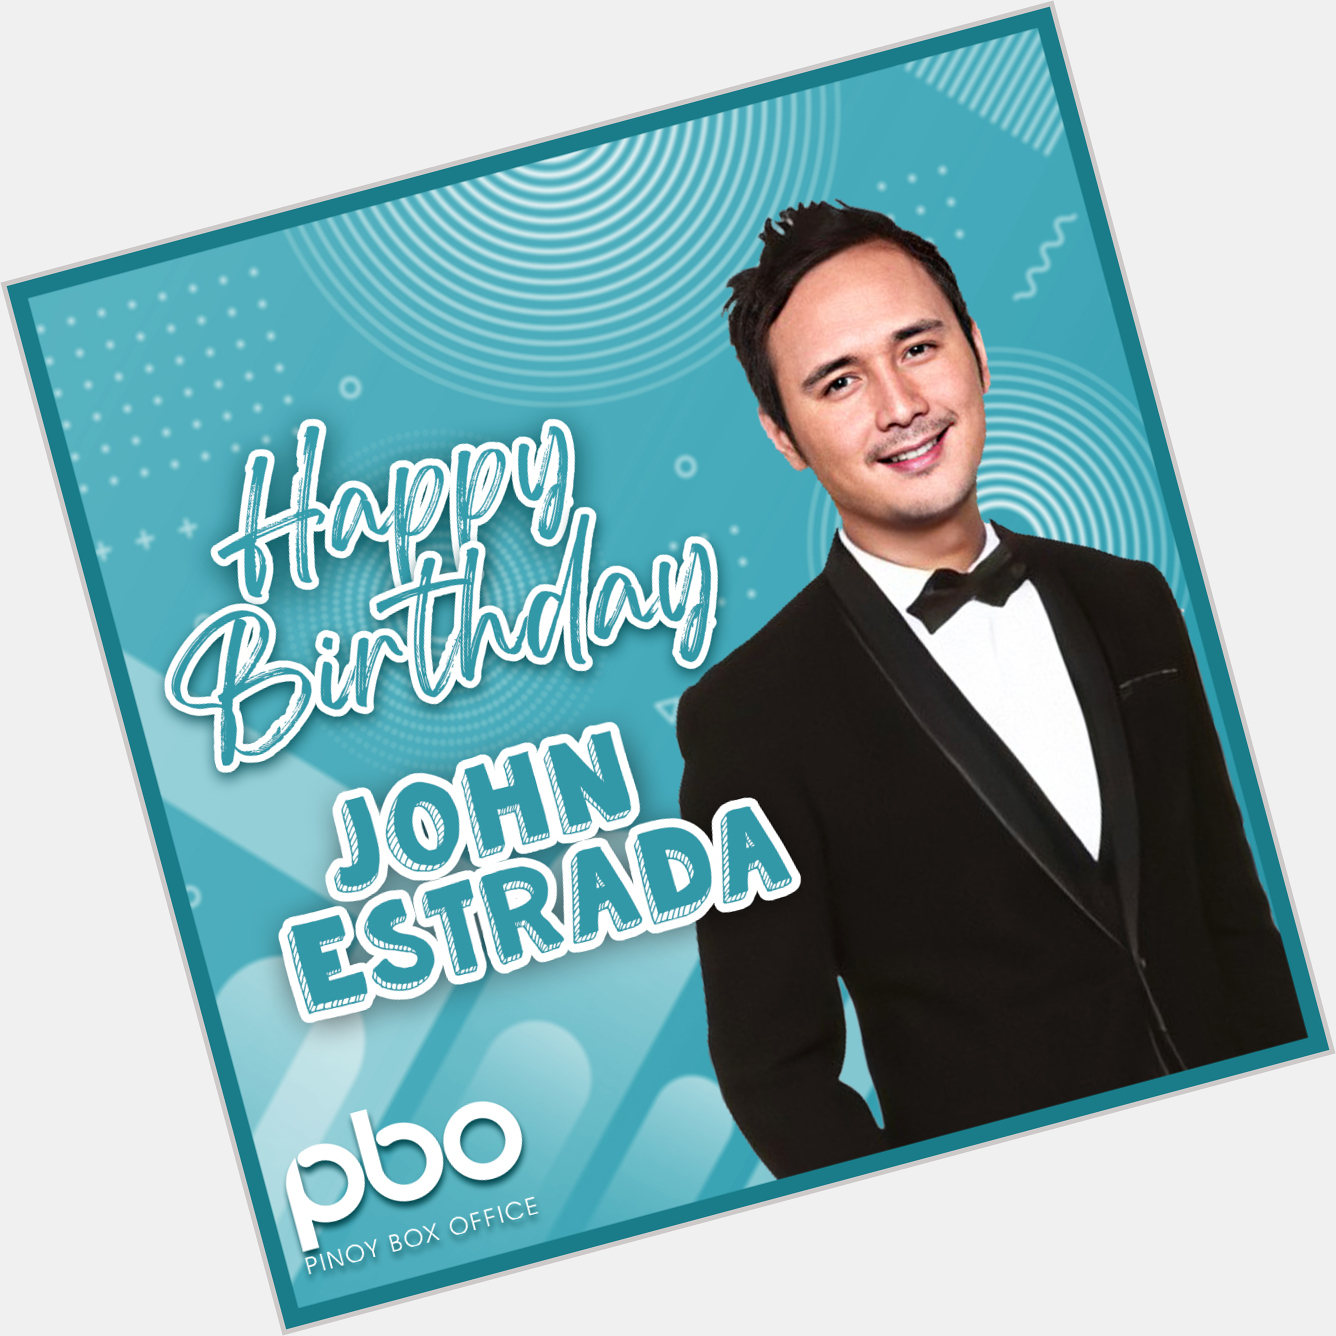 Happy birthday, John Estrada! May this day brings you good luck and fortune! 